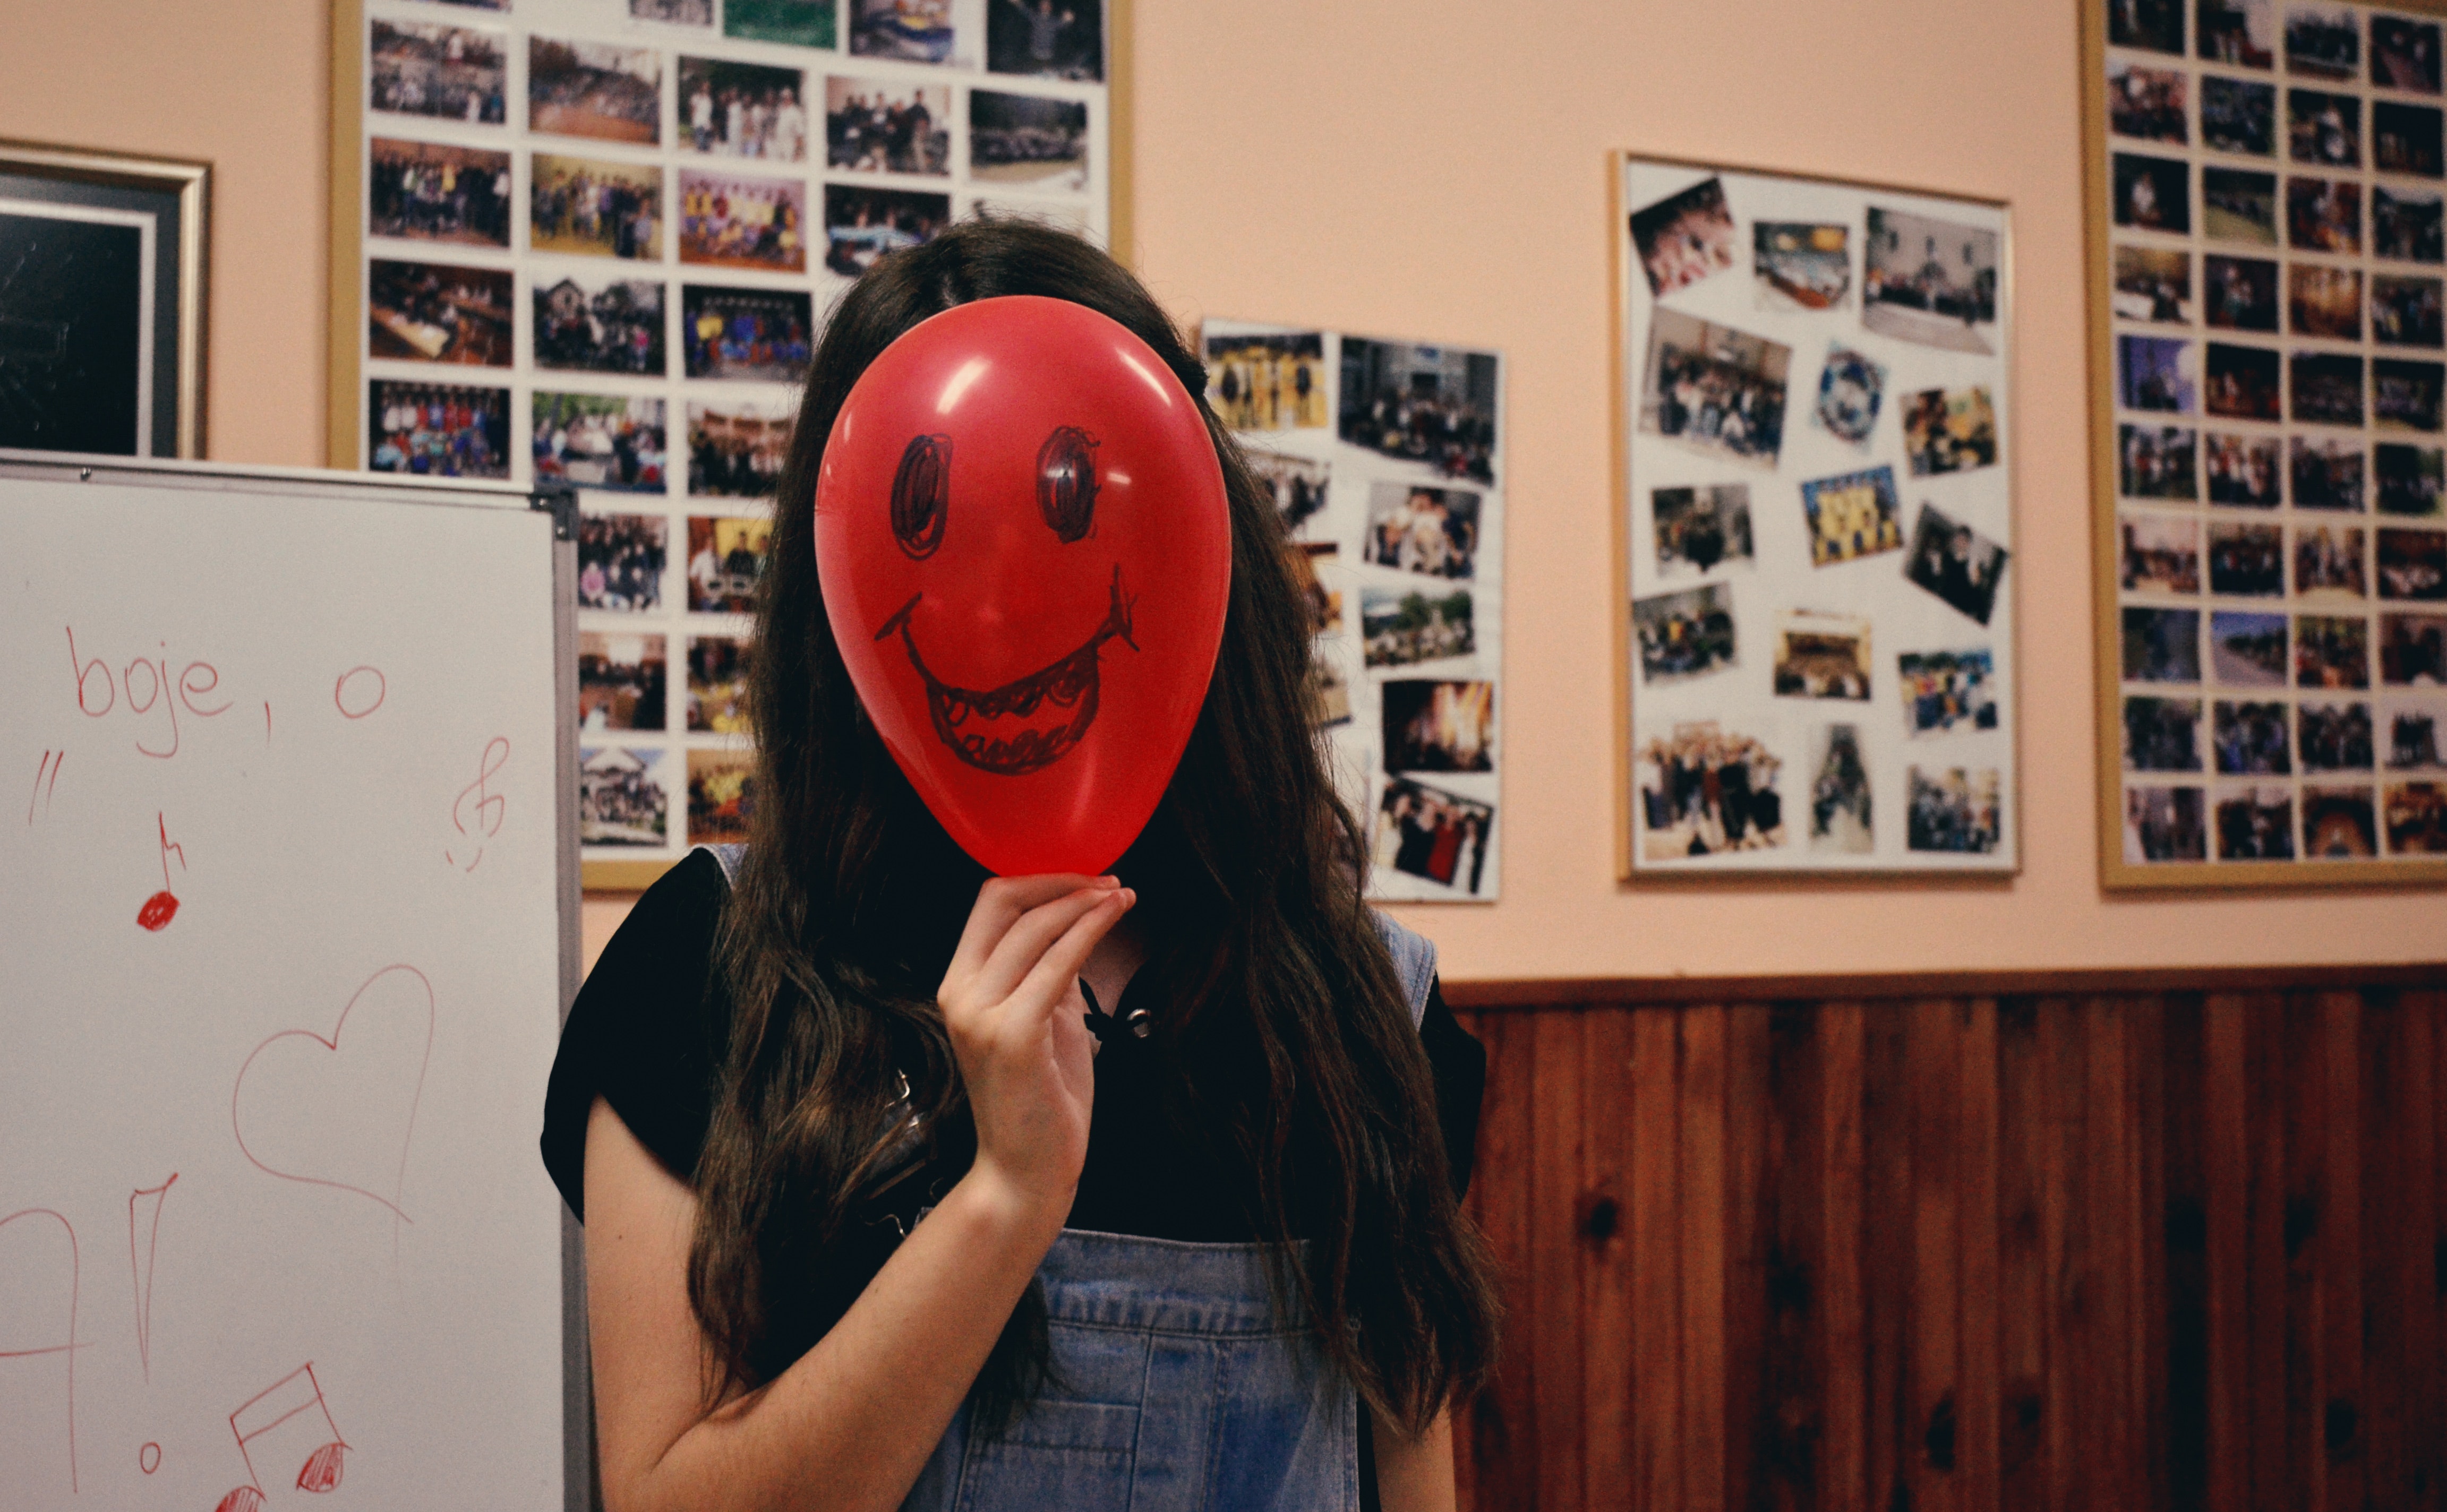 Woman holding red balloon on her face photo inside classroom